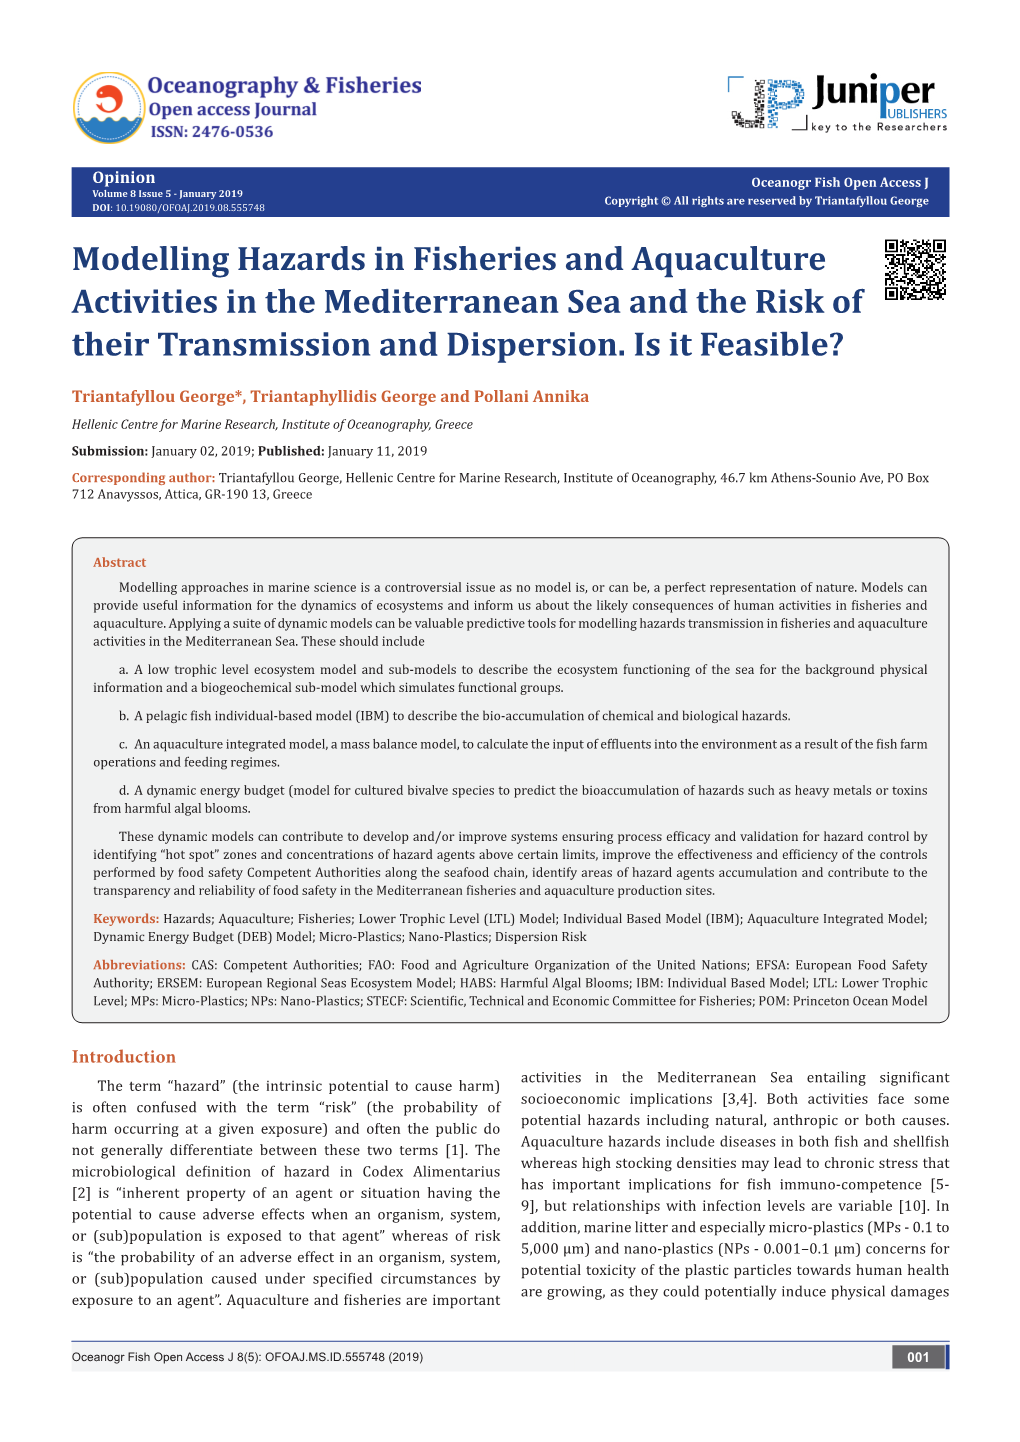 Modelling Hazards in Fisheries and Aquaculture Activities in the Mediterranean Sea and the Risk of Their Transmission and Dispersion